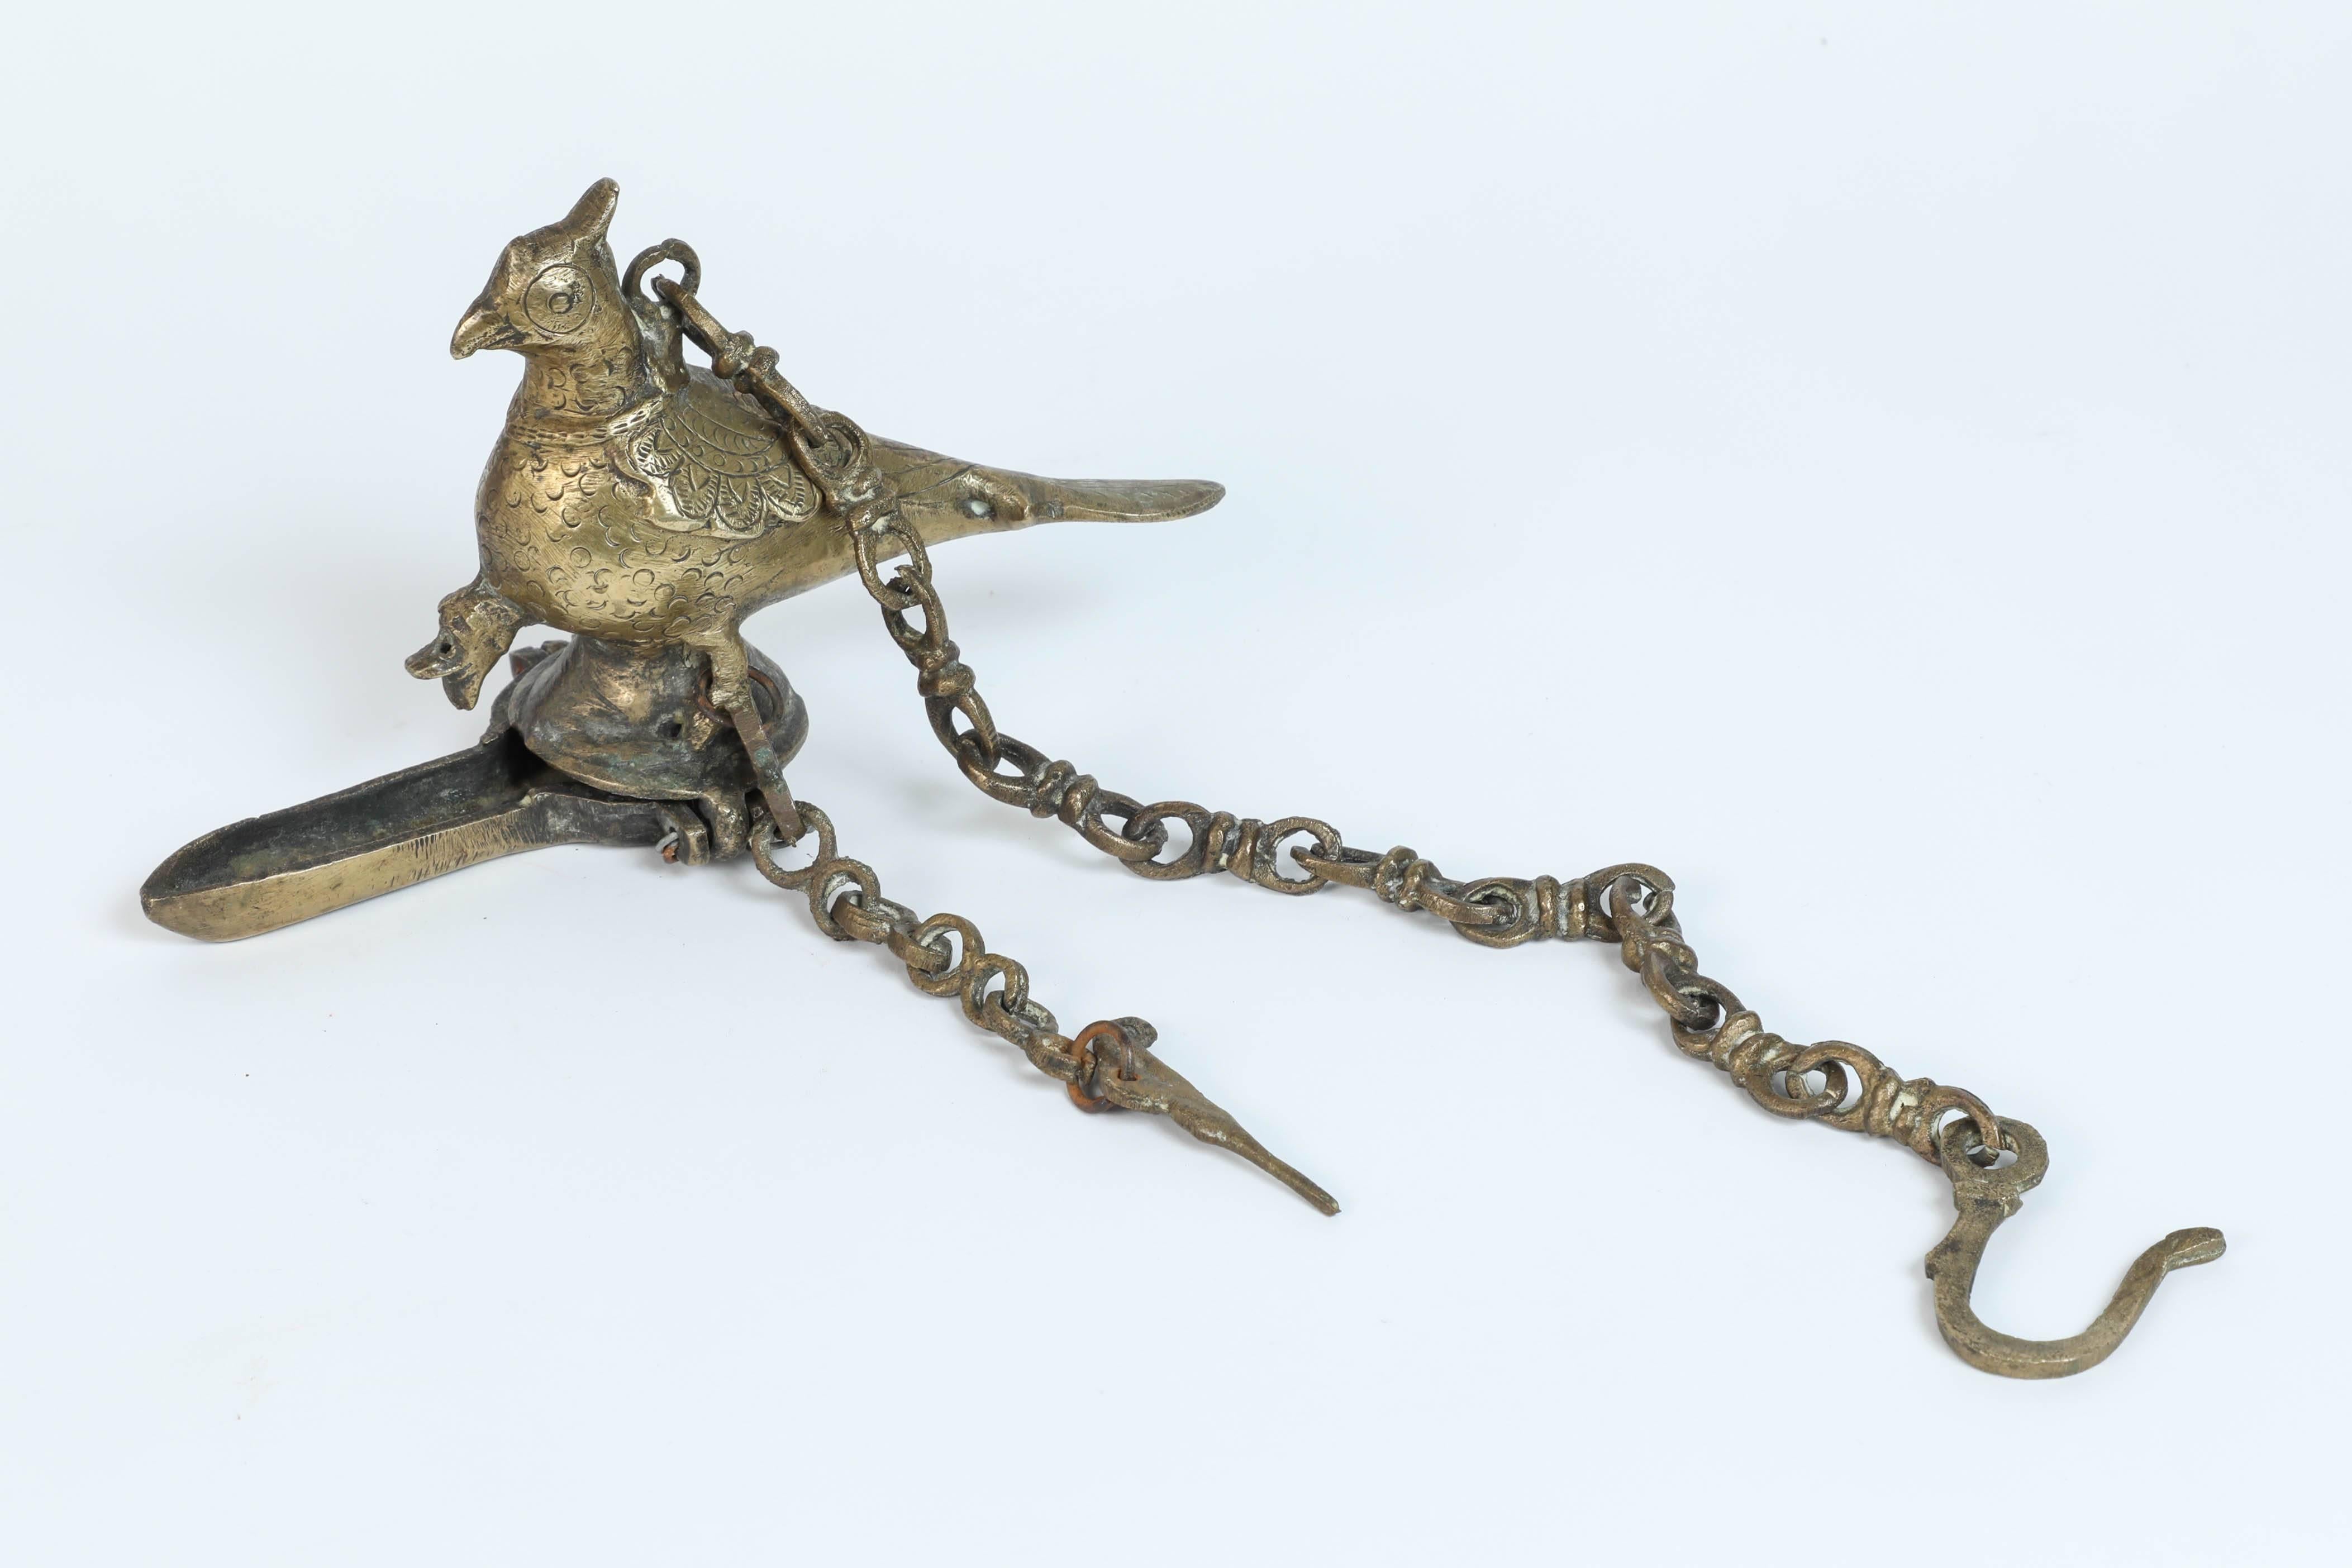 Antique hanging cast bronze oil lamp in the shape of a beautiful mythical bird peacock figure with hanger chain.
The body of the bird acts as a reservoir for oil while the spout at the bottom is the location for the lamp wick.
Handcrafted using the